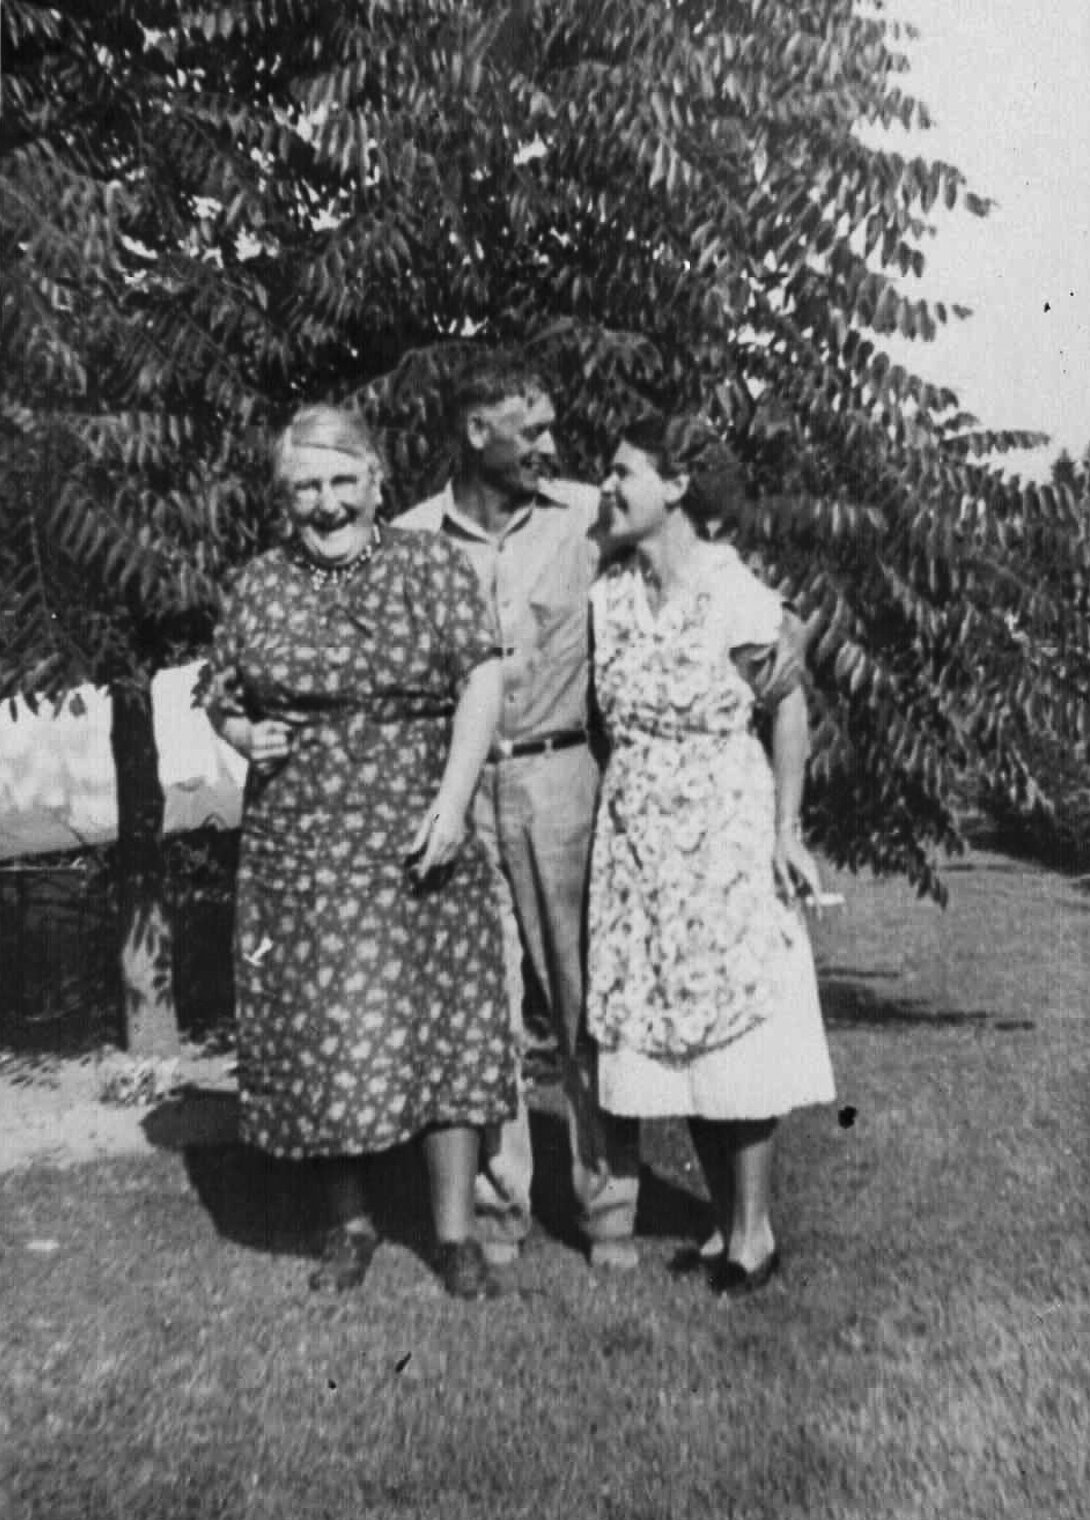 vintage black and white film photograph of a man and woman and mother laughing together